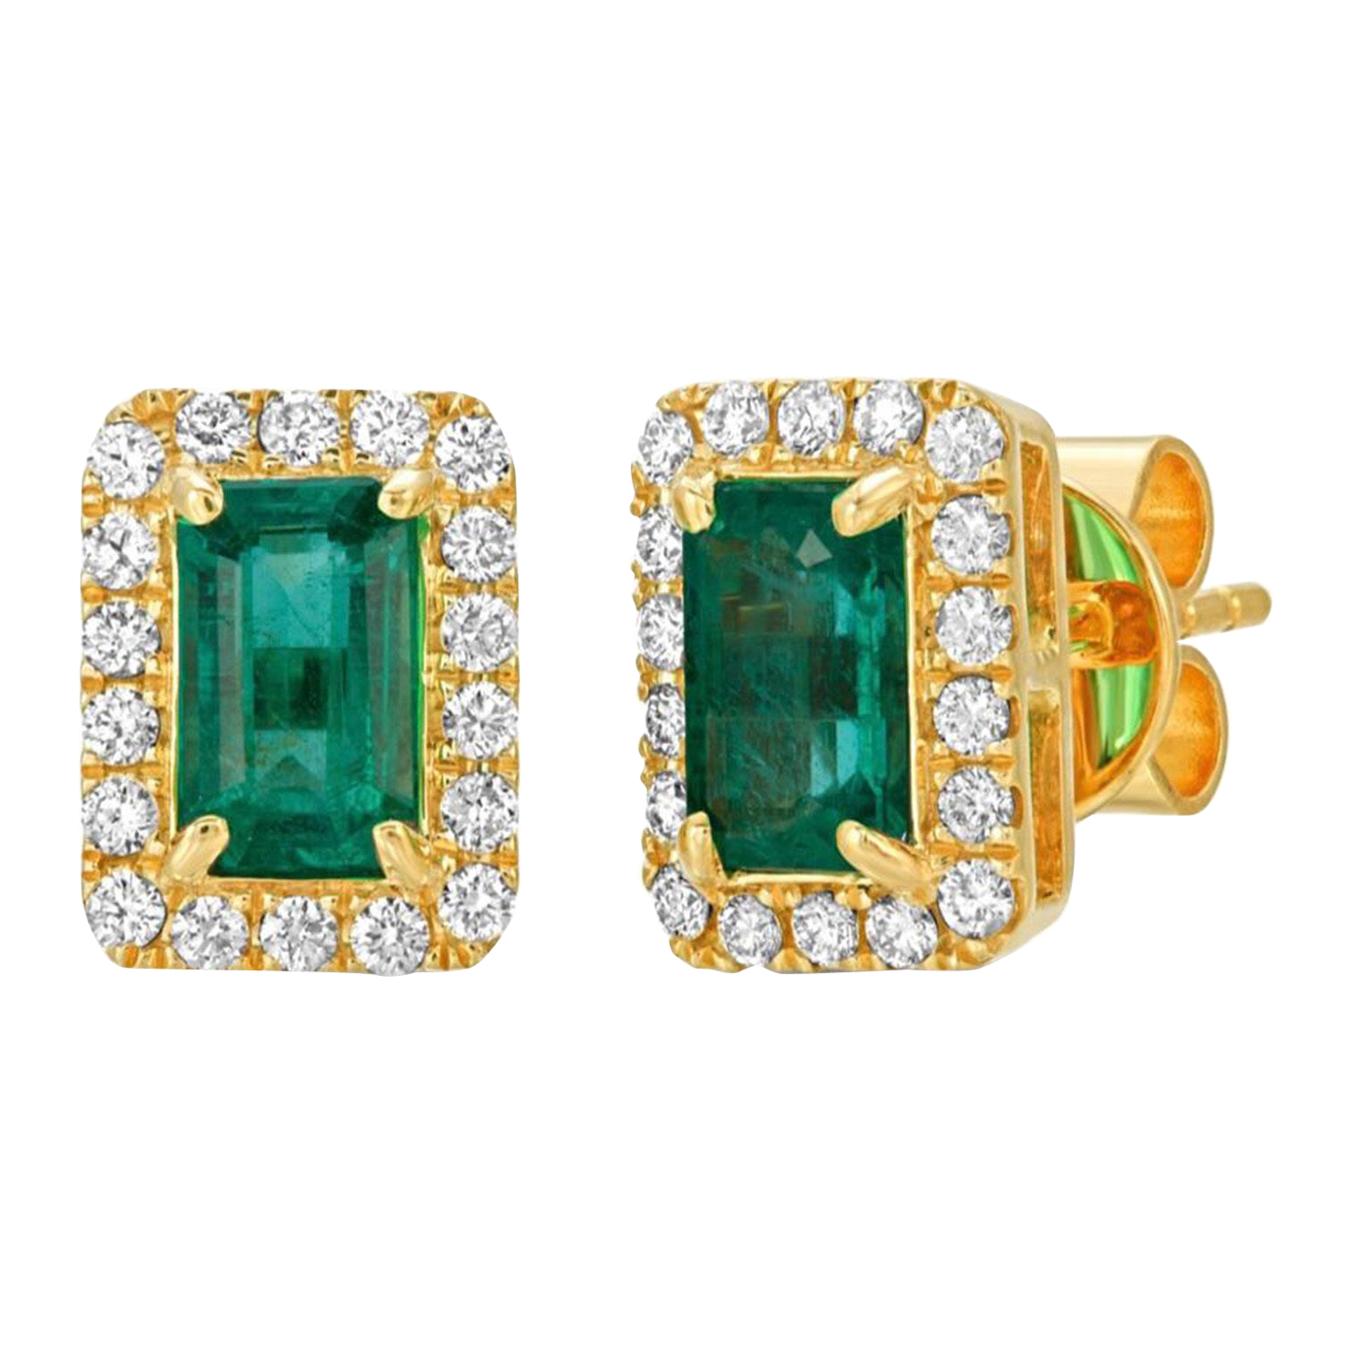 1.10 Ct Colombian Emerald & 0.30 Ct Diamonds in 14k Yellow Gold Stud Earrings For Sale